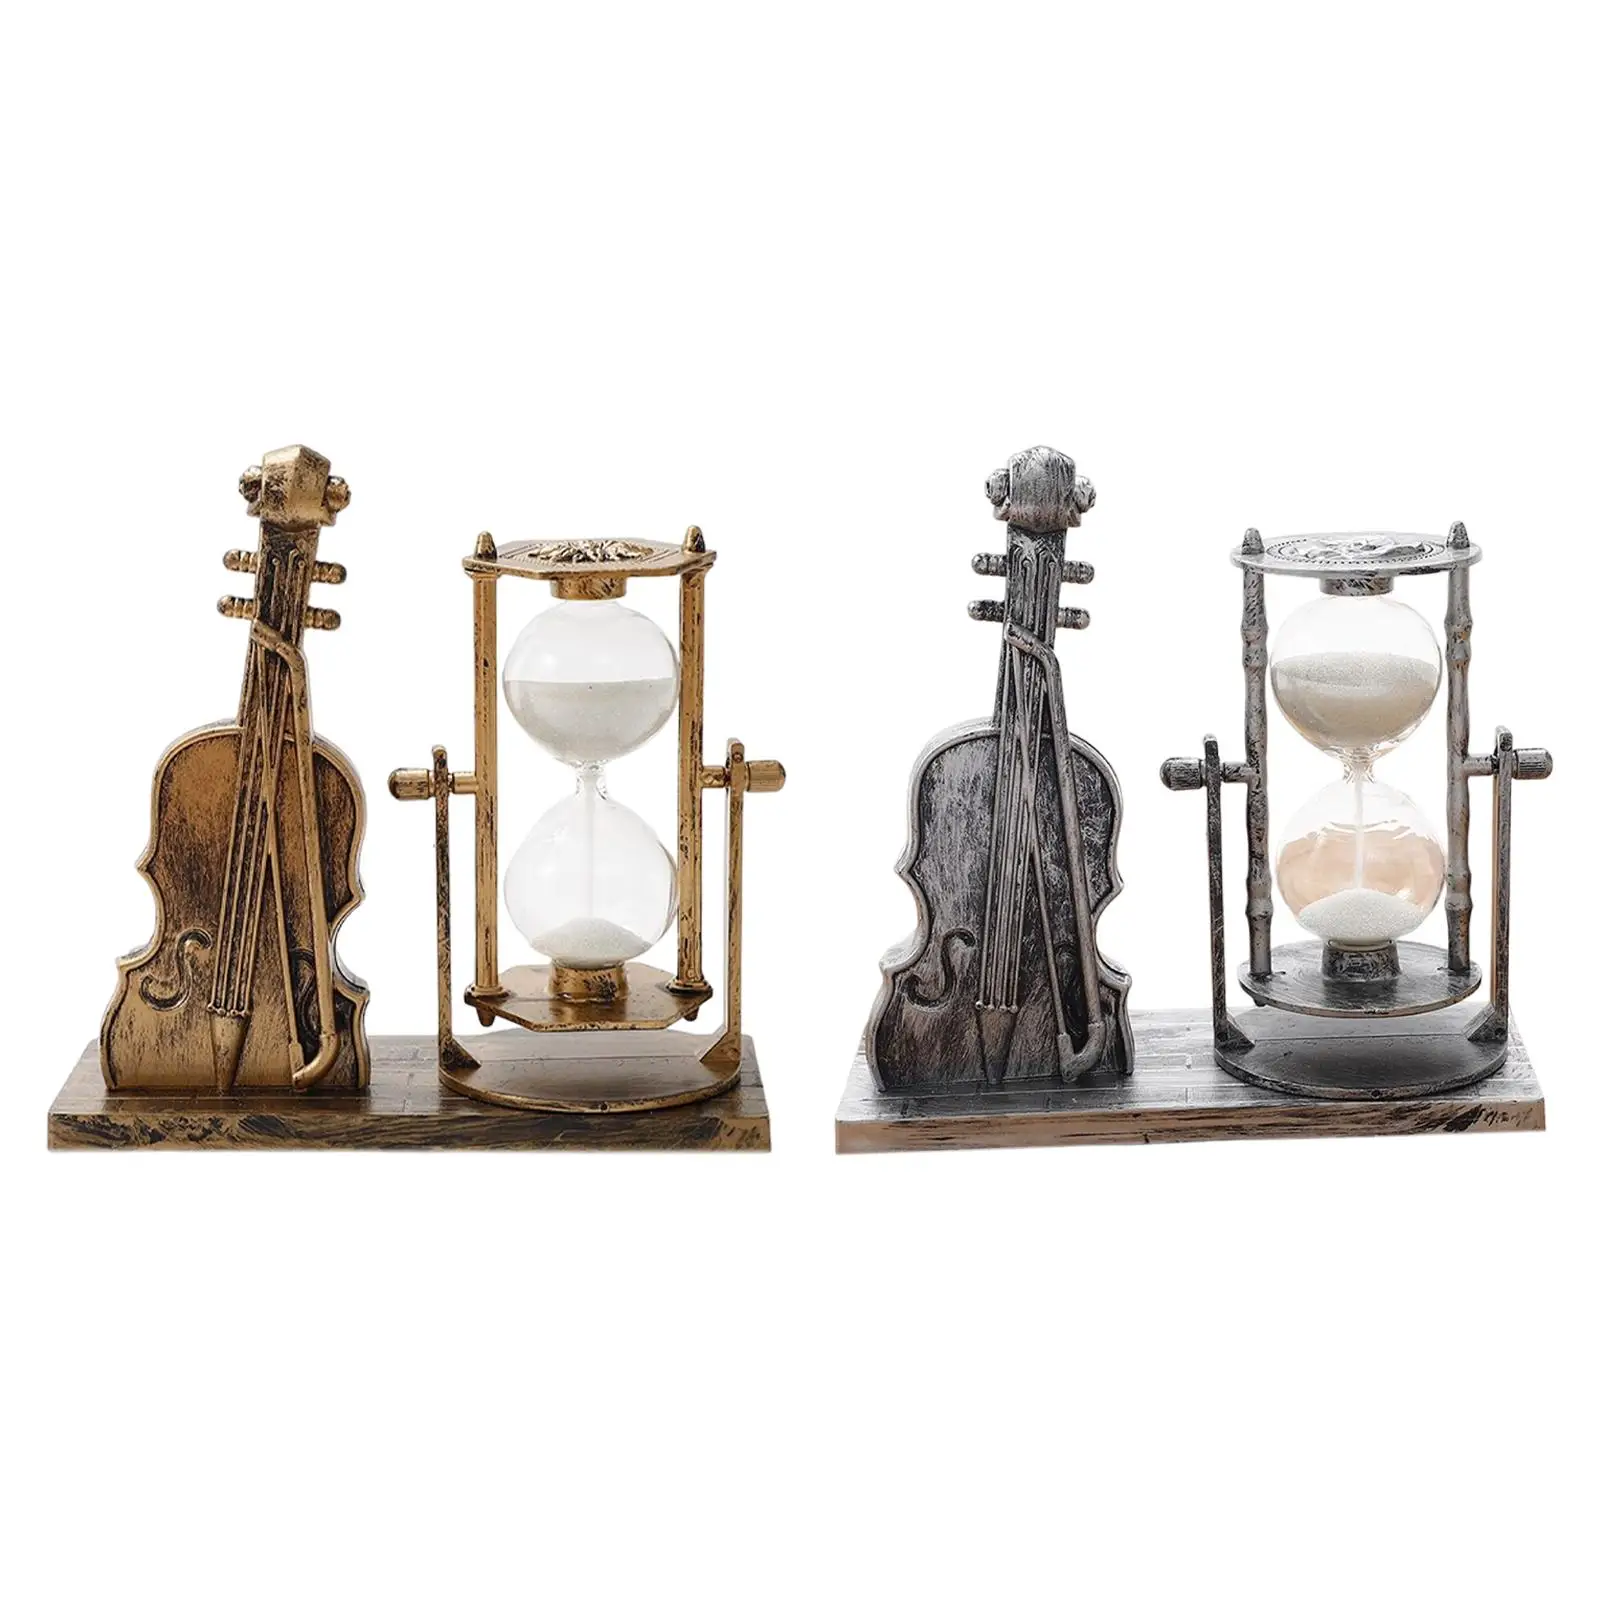 Hourglass Violin Sculpture Collection Sand Timer Exquisite Sandglass for Anniversary Yard Festival Table Centerpieces Wedding